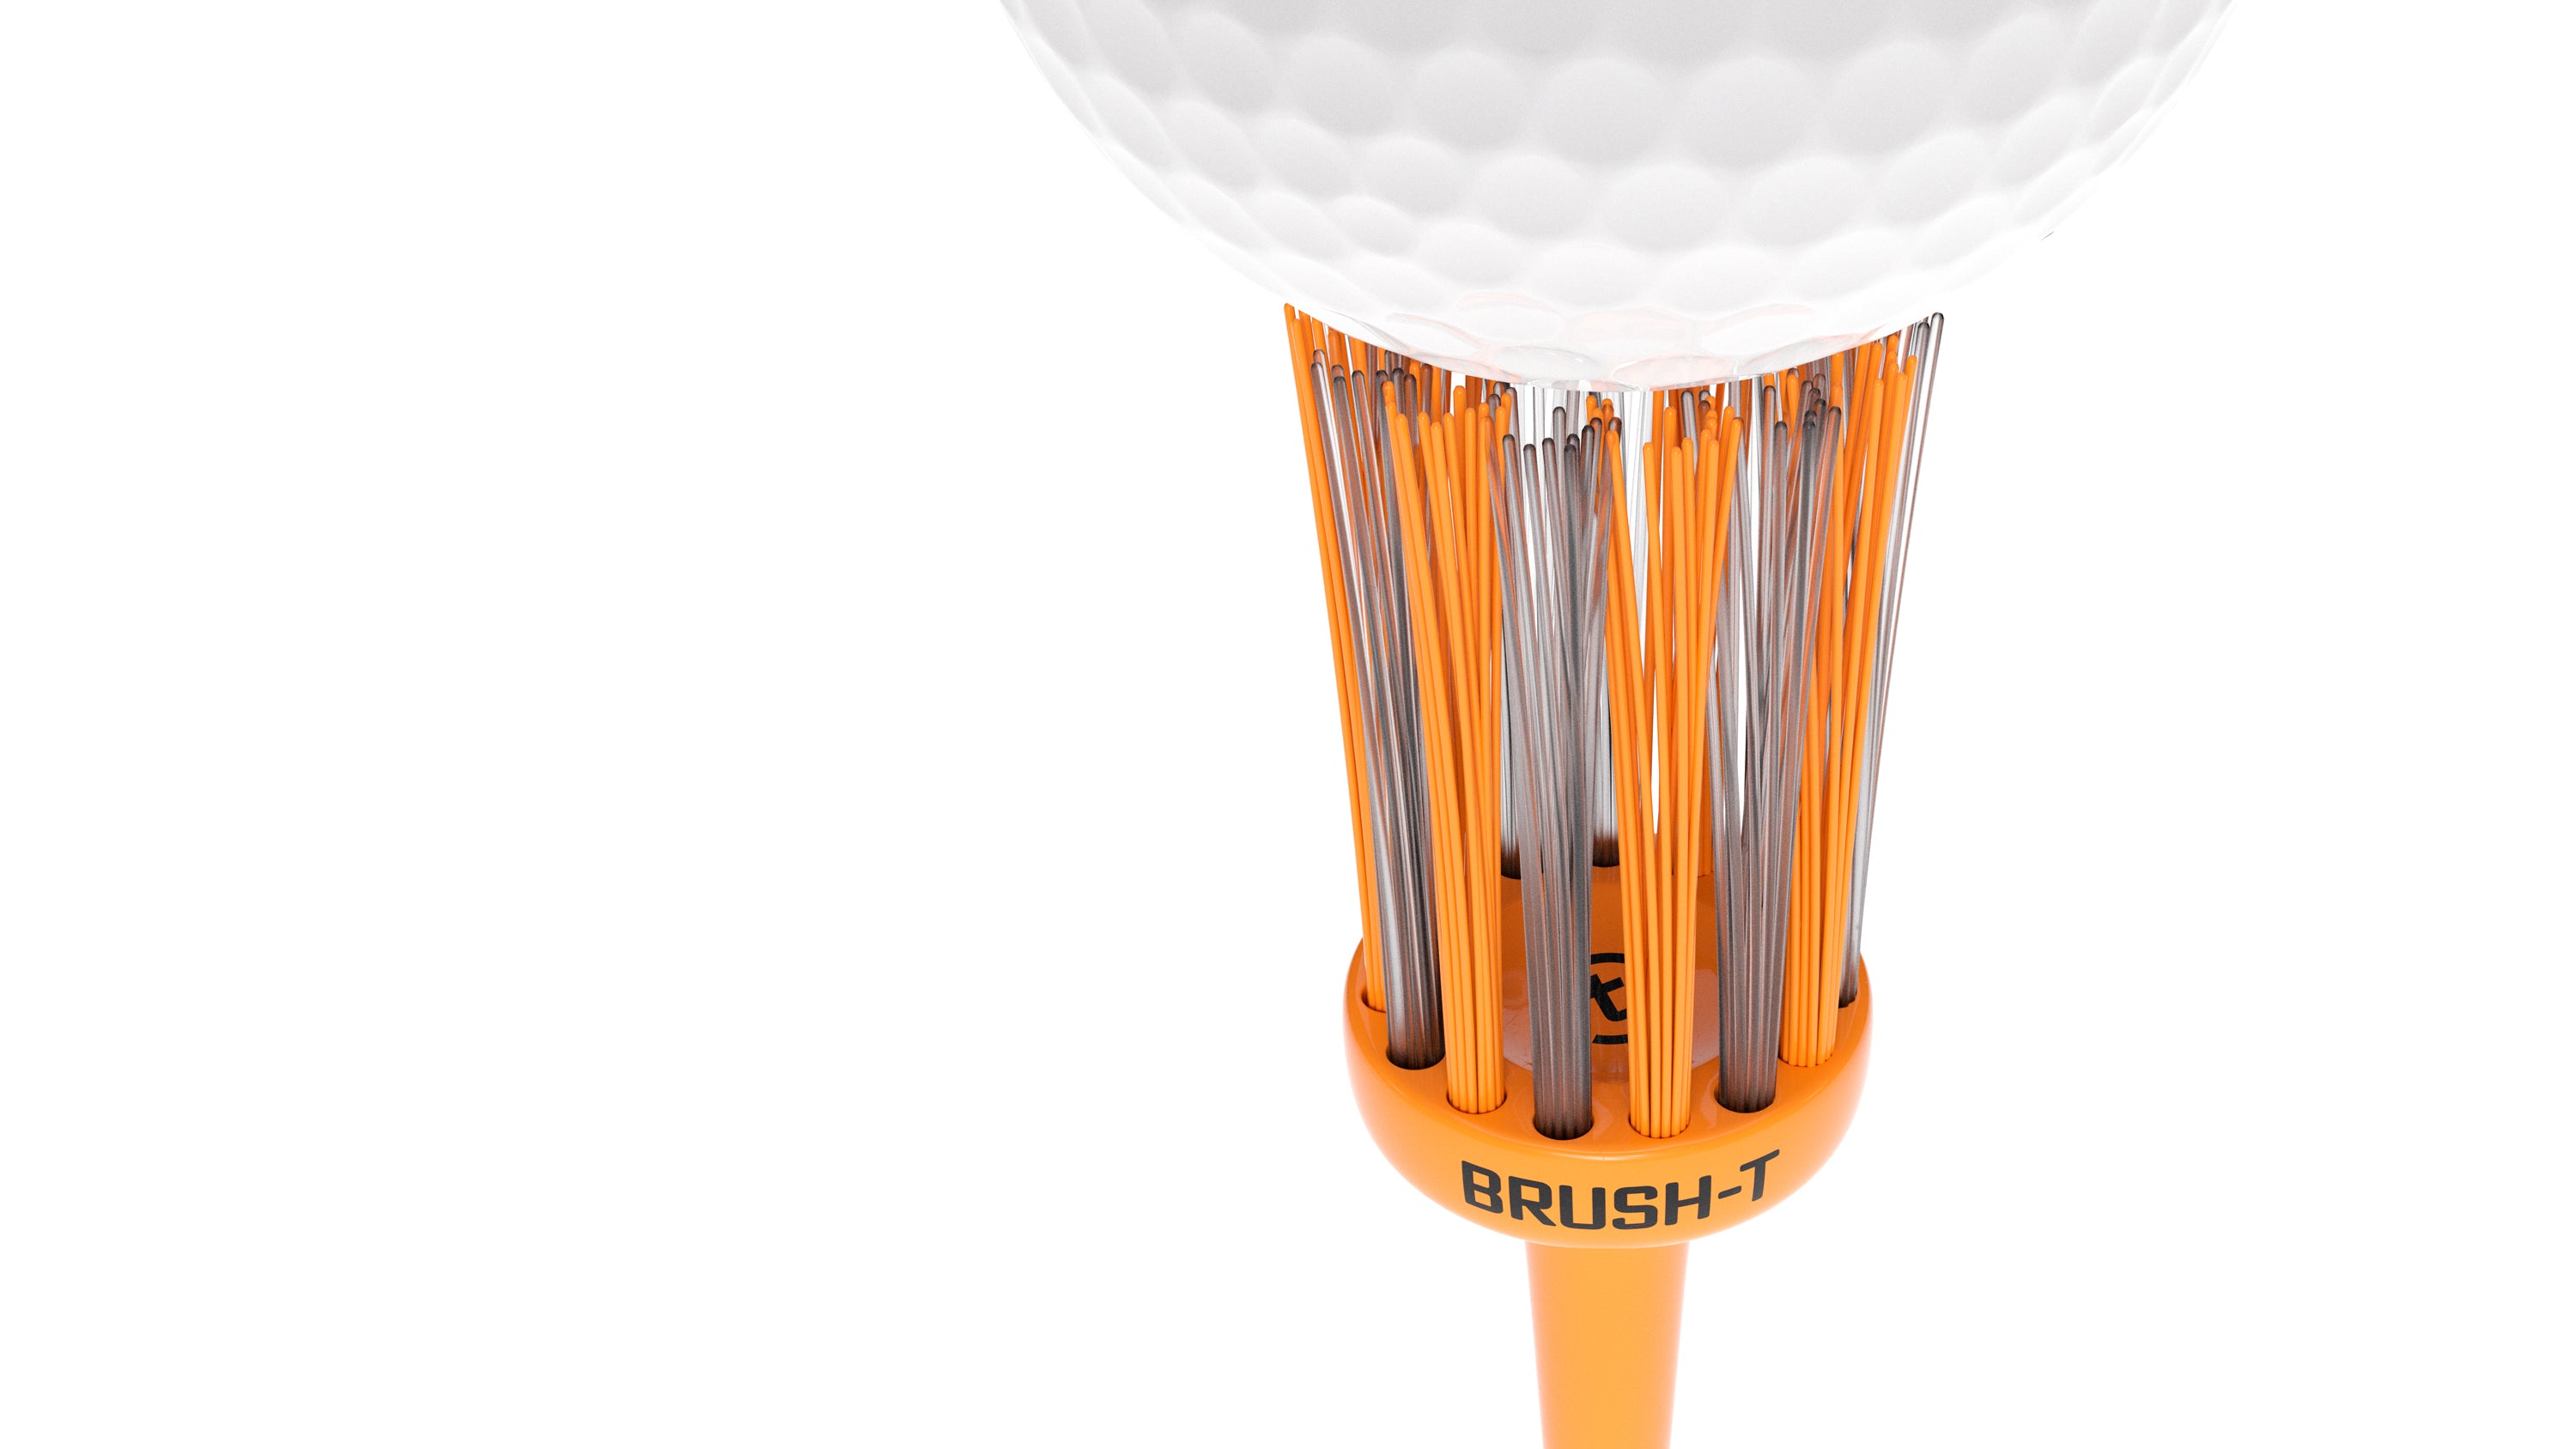 Brush-T by Bonfit Less Friction For Farther Drives